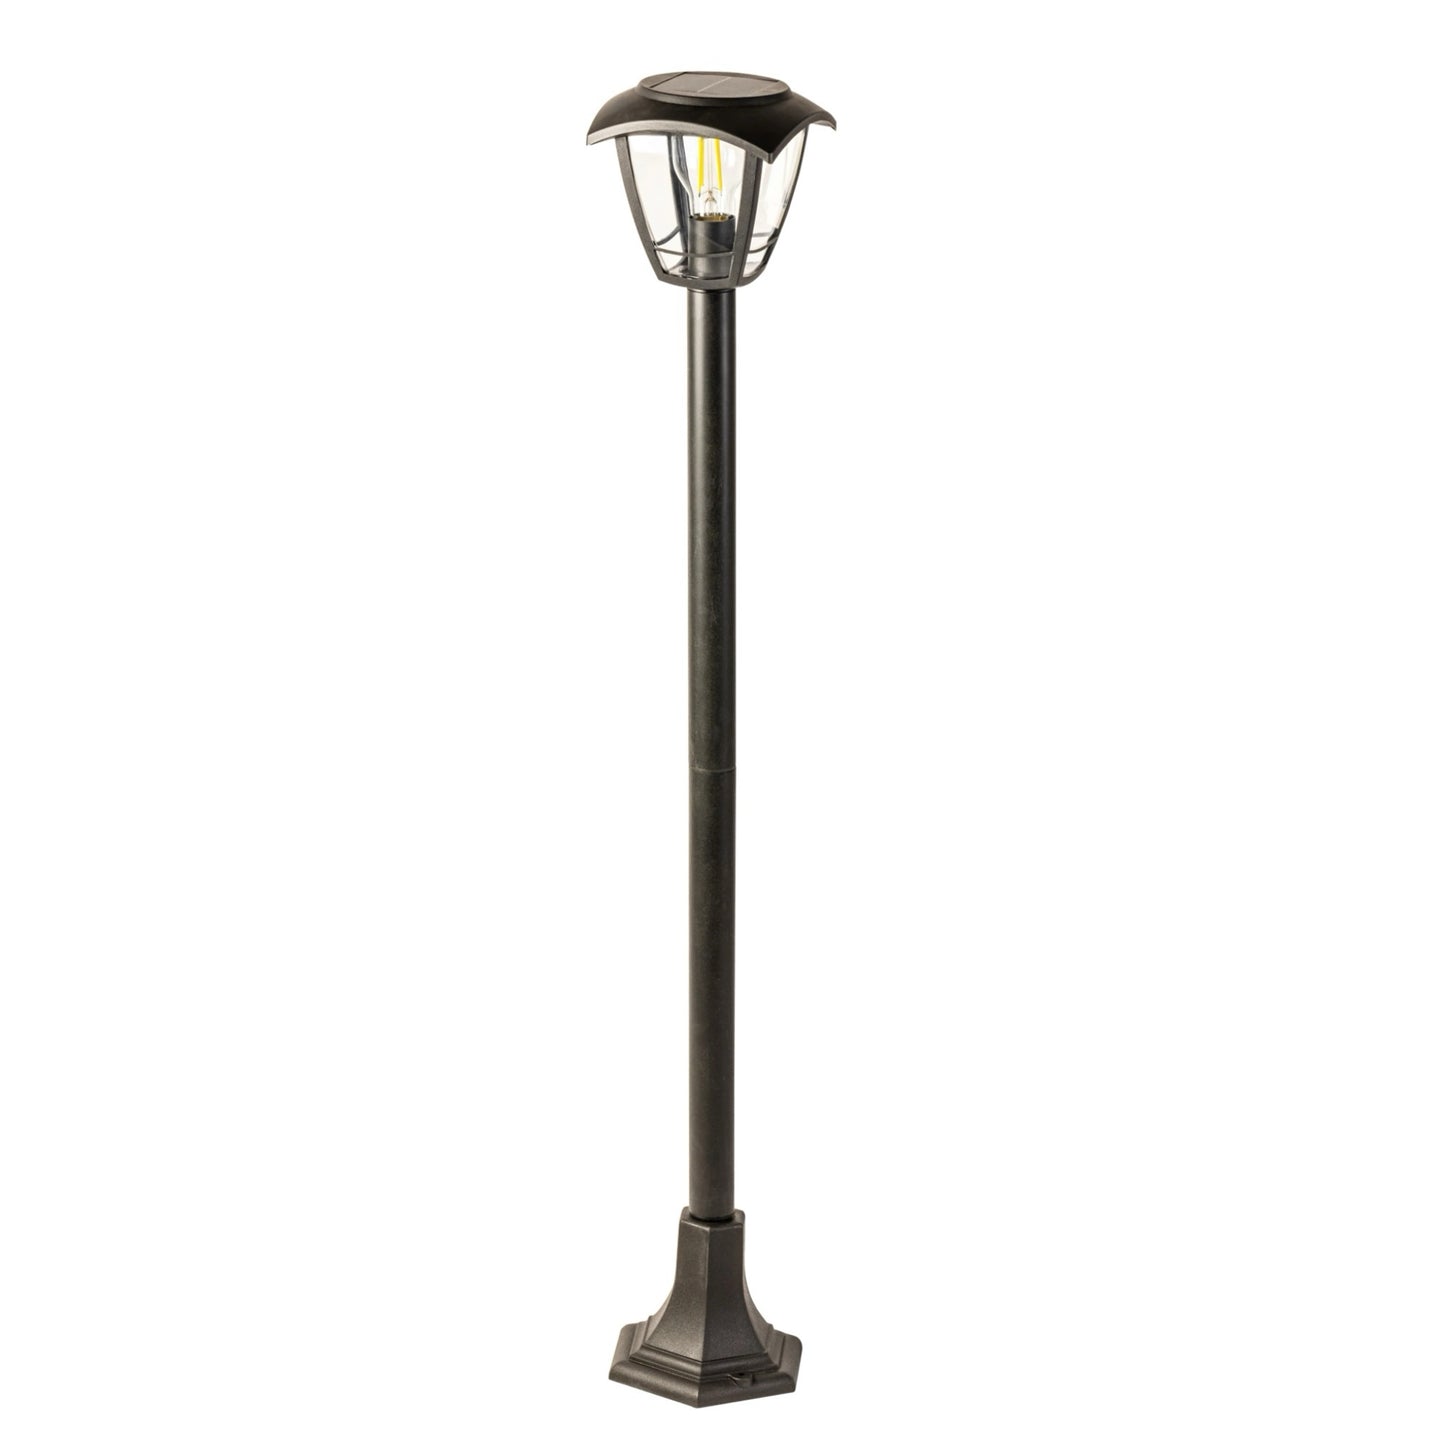 Our Lara black solar outdoor post light would look perfect in a modern or more traditional home design. Outside post lights can provide atmospheric light in your garden, at the front door or on the terrace as well as a great security solution. It is designed for durability and longevity with its robust polycarbonate material producing a fully weatherproof and water resistant light.